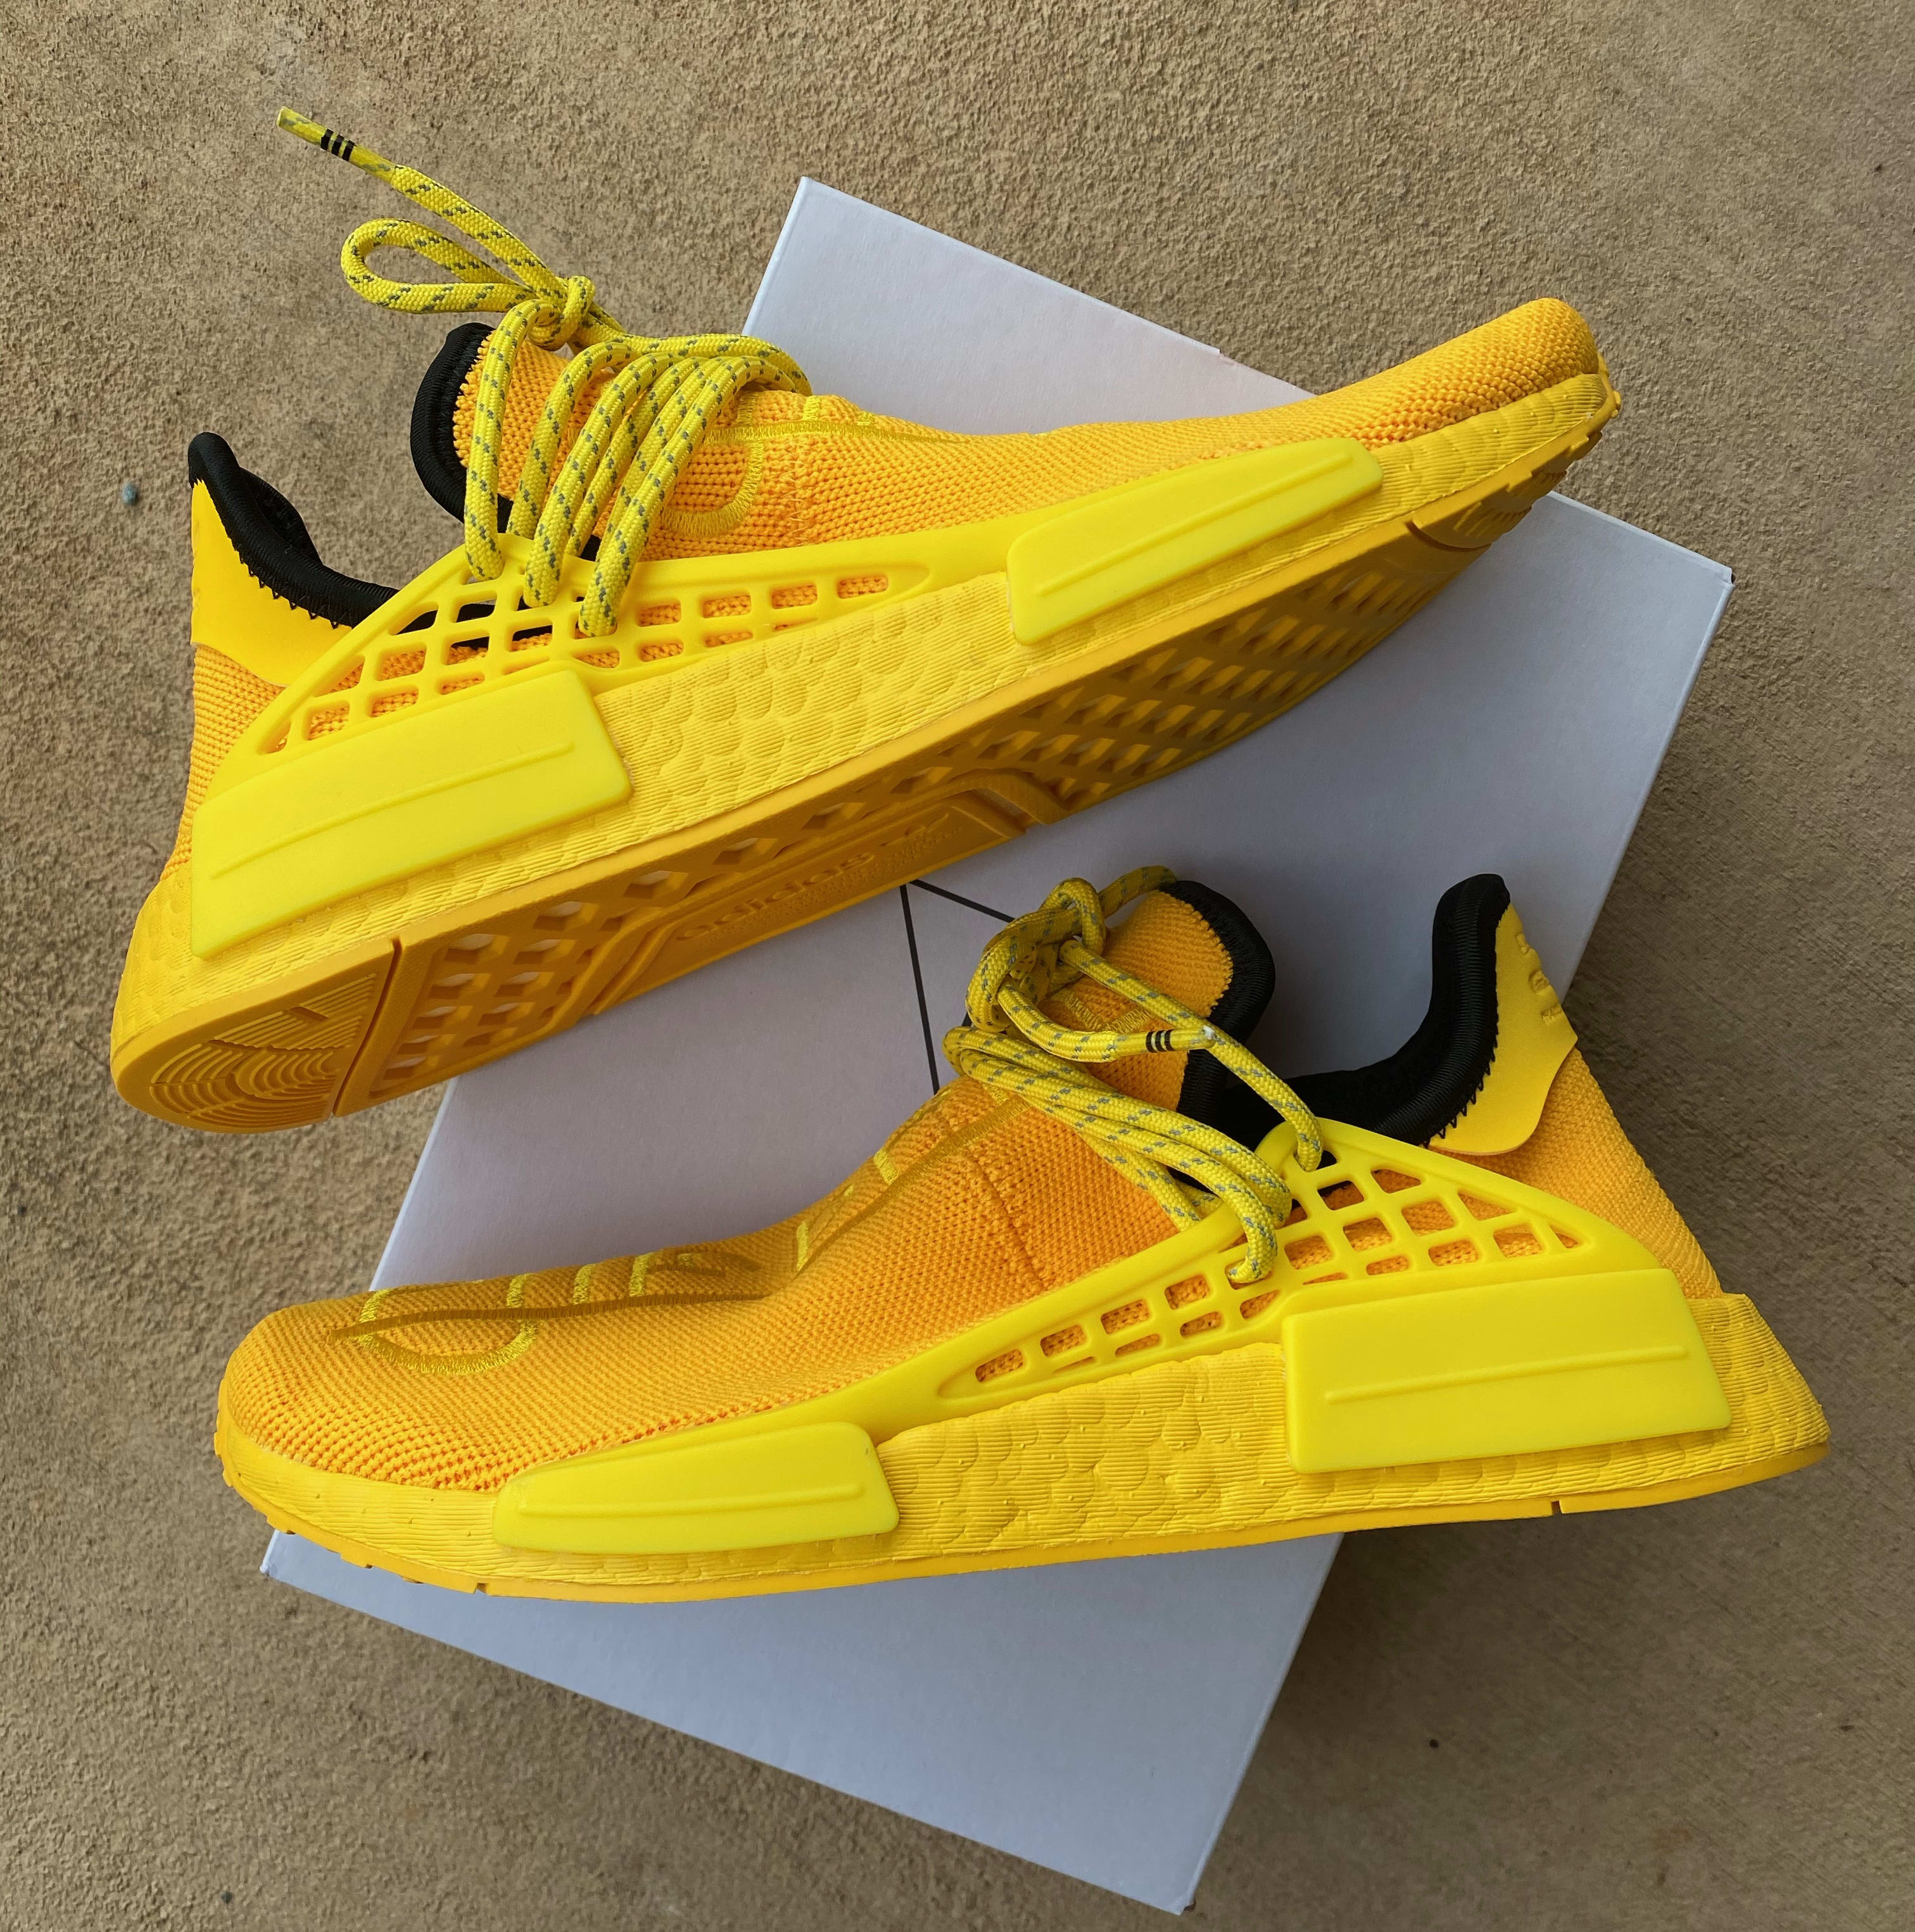 Pharrell x Adidas NMD Hu 'Yellow' Release Date GY0091 | Sole Collector